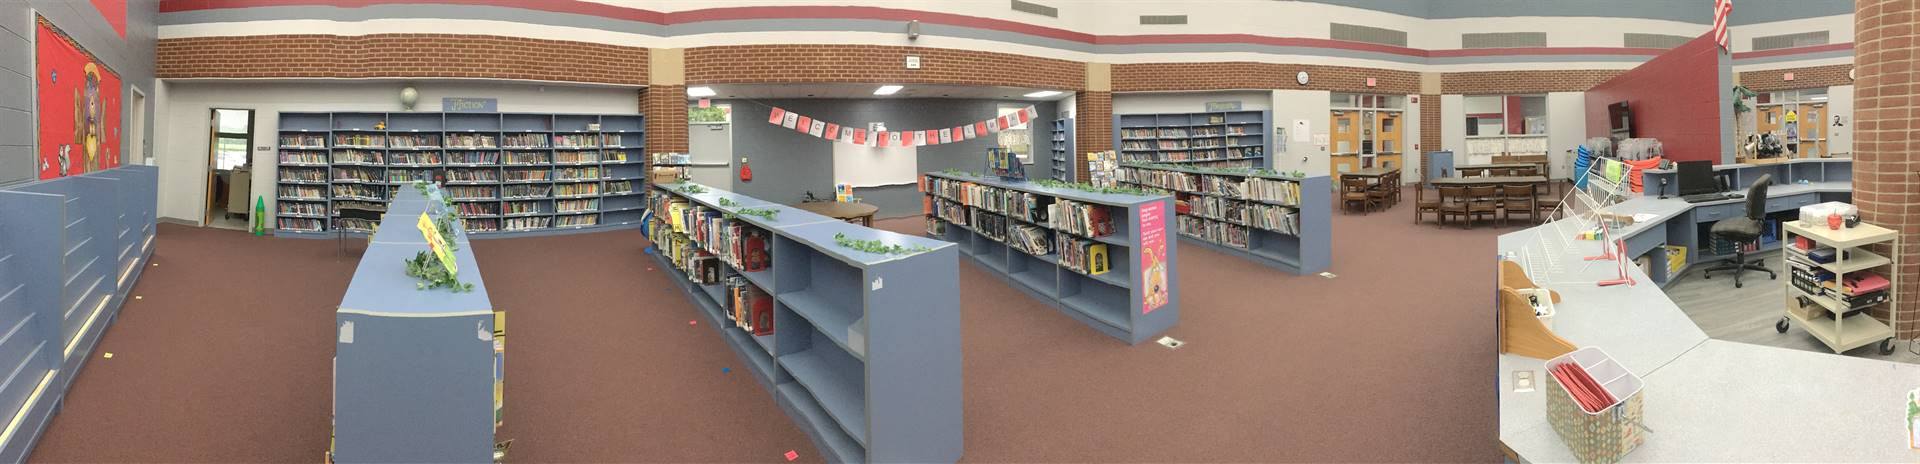 Library Layout